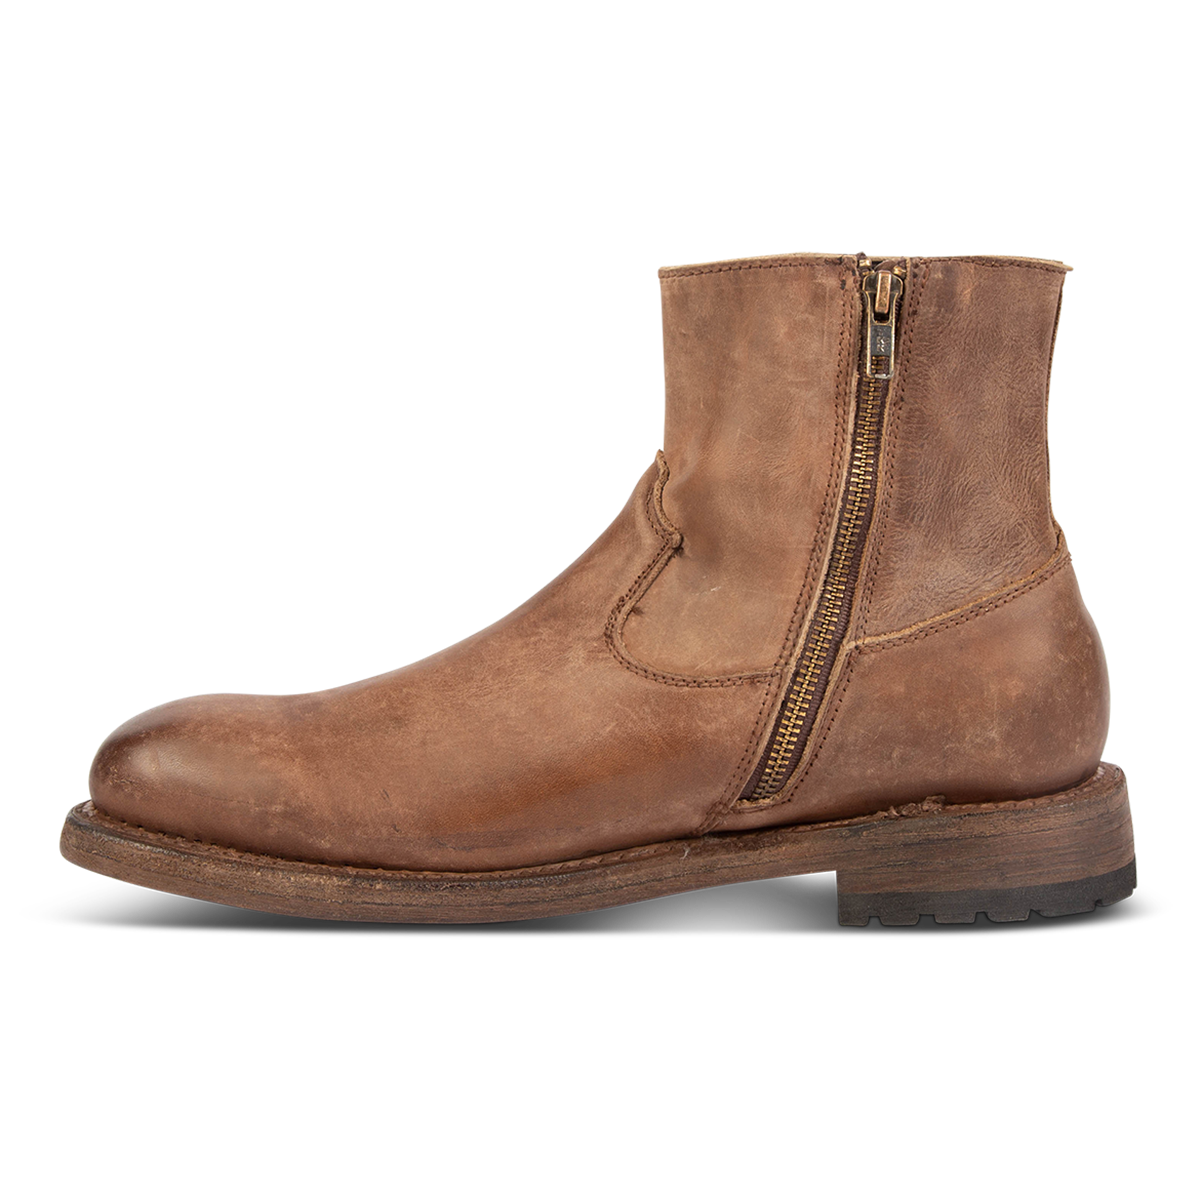 Inside view showing working zip closure and stitch detailing on FREEBIRD men's Pueblo tan ankle boot